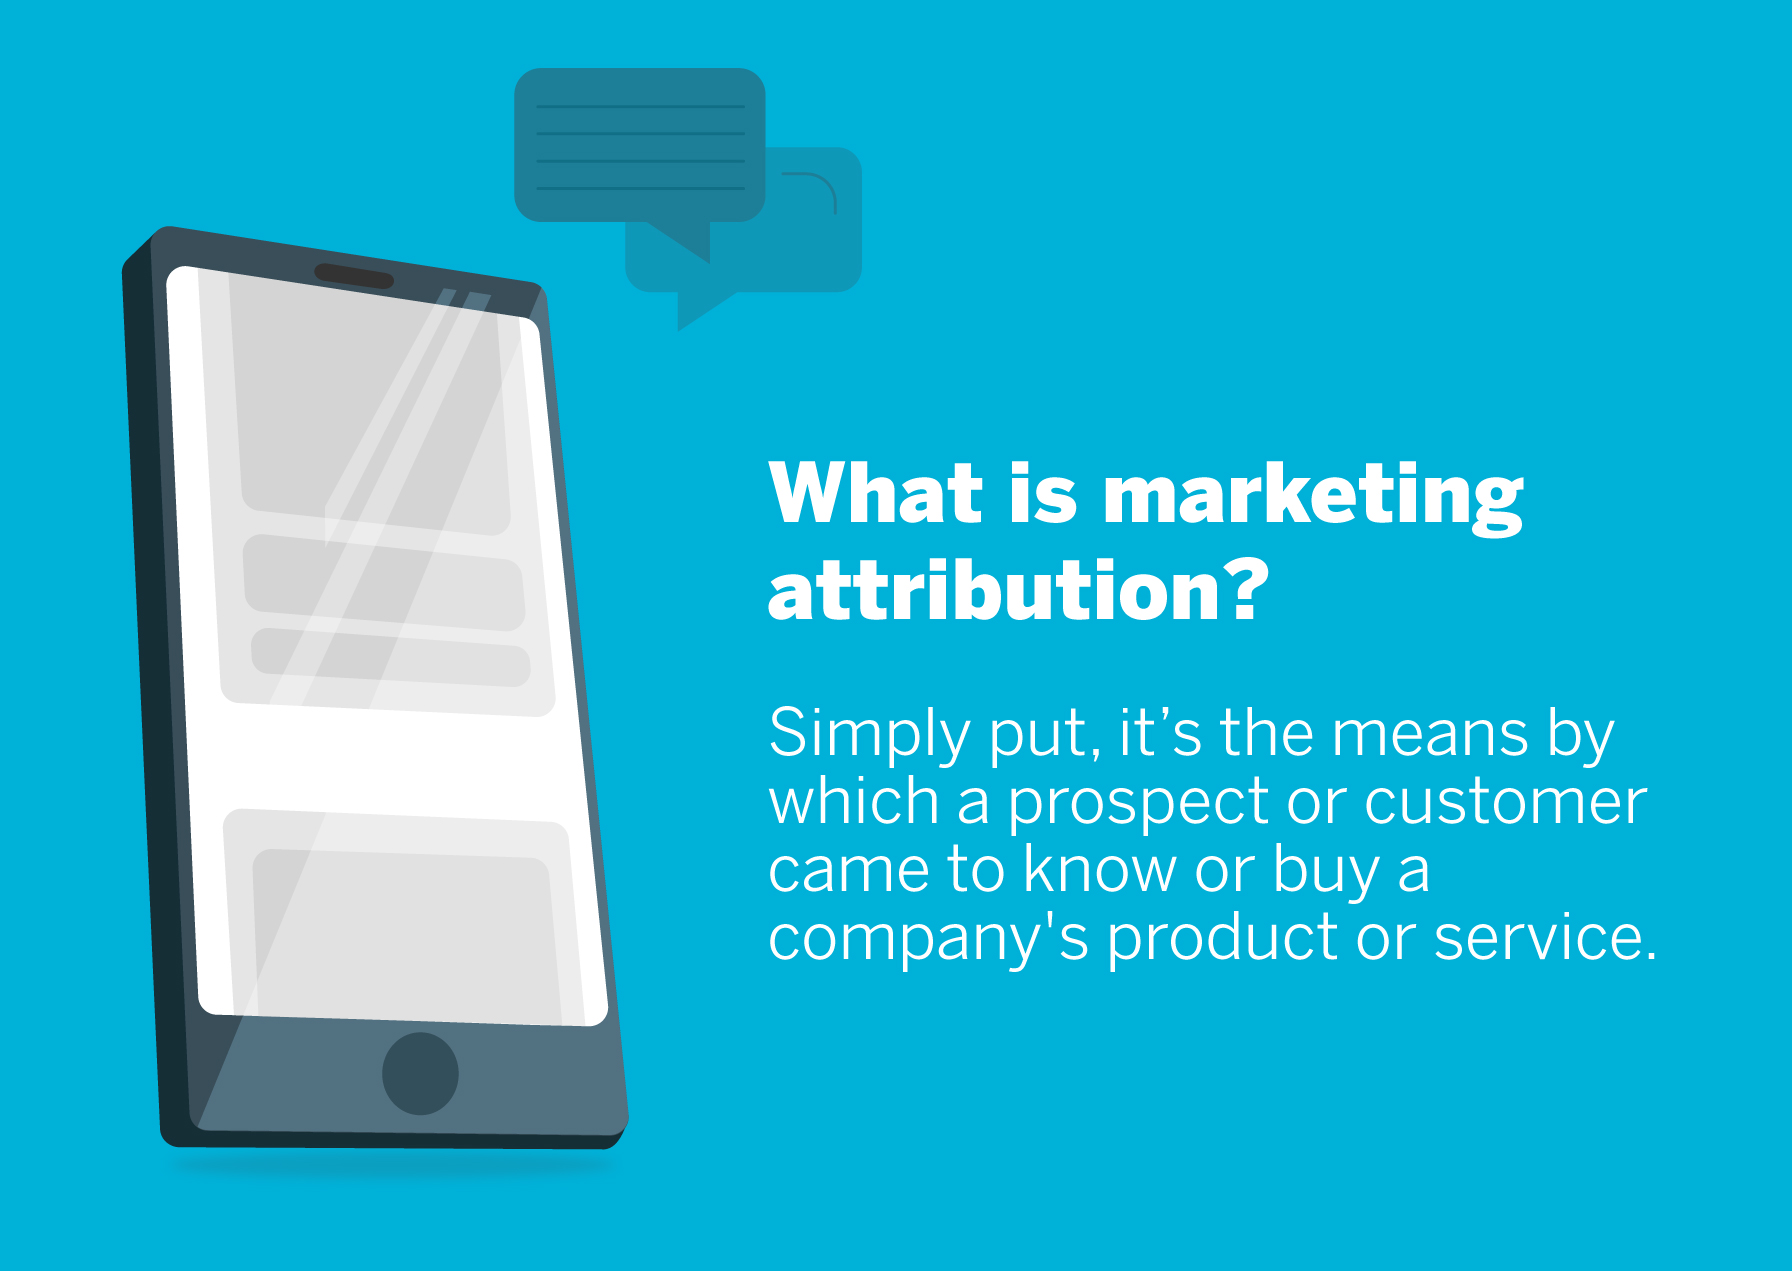 Simply put, marketing attribution is the means in which a prospect or customer came to know or buy a company's products or services